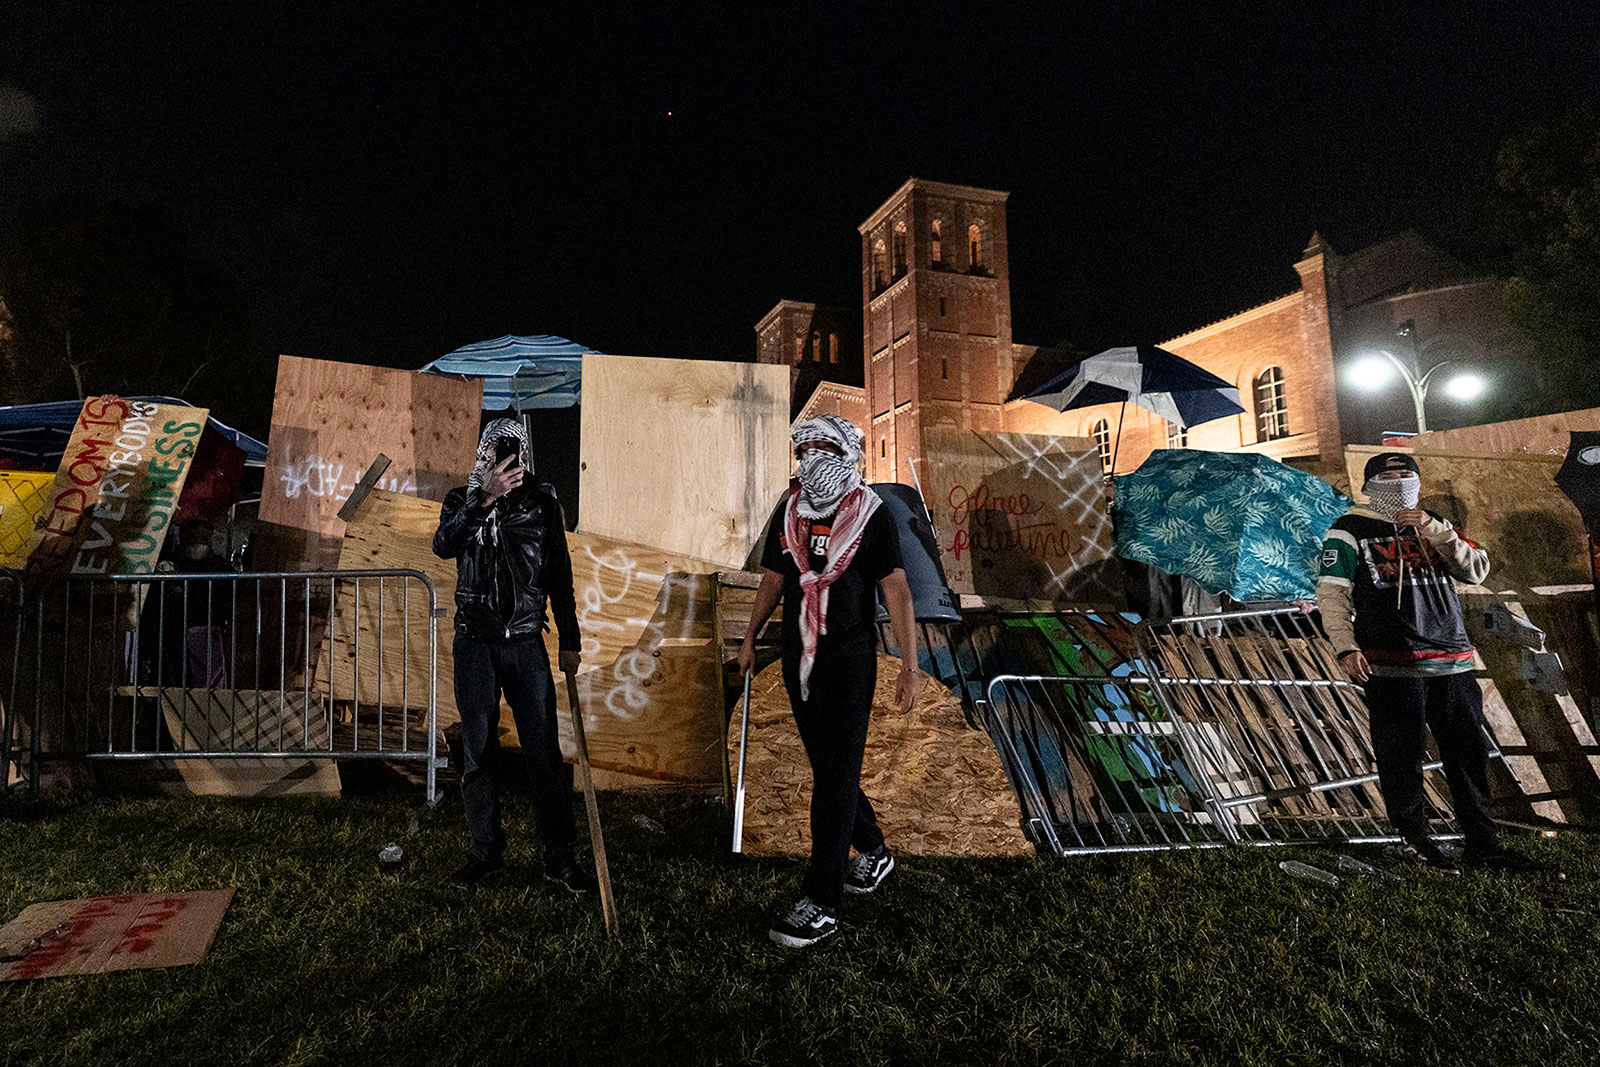 Pro-Palestinian demonstrators rebuild a barricade around an encampment on the campus of the University of California, Los Angeles (UCLA) on Wednesday, May 1. Before police were deployed to campus, pro-Palestinian protesters and Israel supporters were clashing at the school, according to multiple reports. 